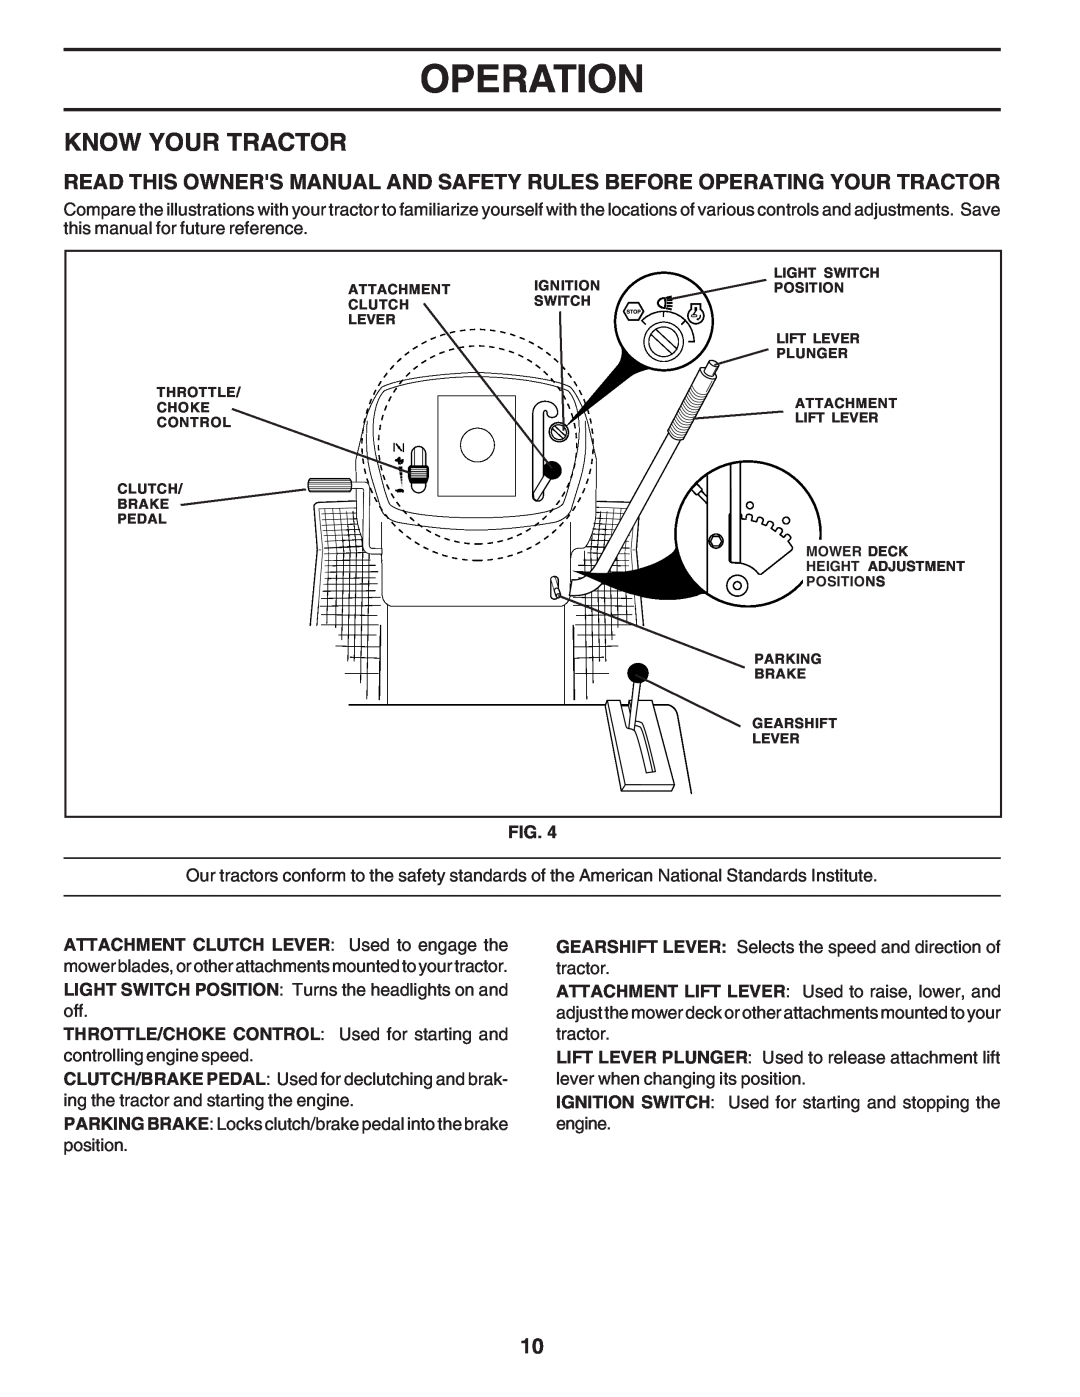 Poulan PC1538B manual Know Your Tractor, Operation 